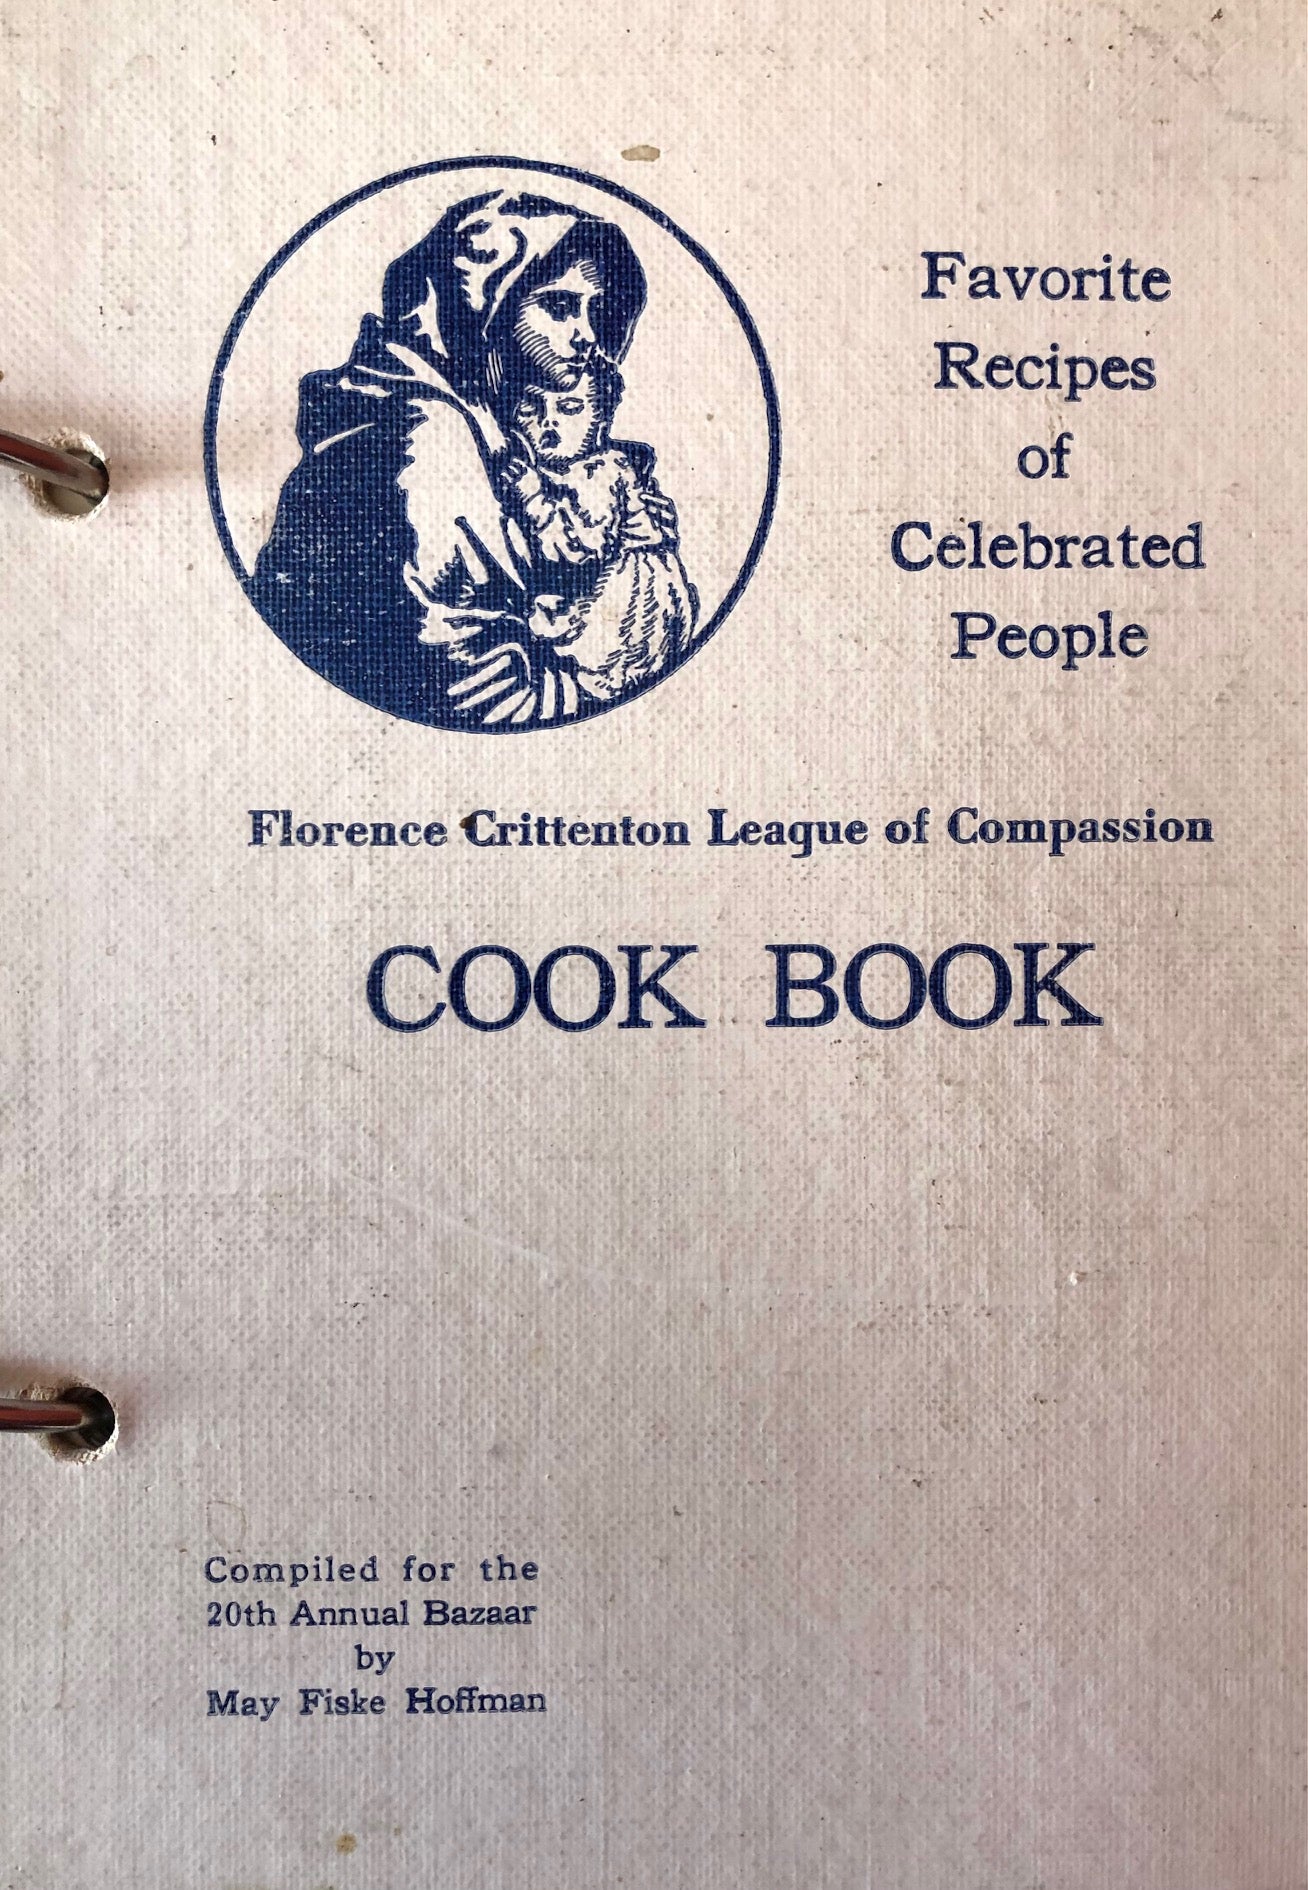 (Charity) May Fiske Hoffman, ed. Florence Crittenton League of Compassion Cook Book: Favorite Recipes of Celebrated People.